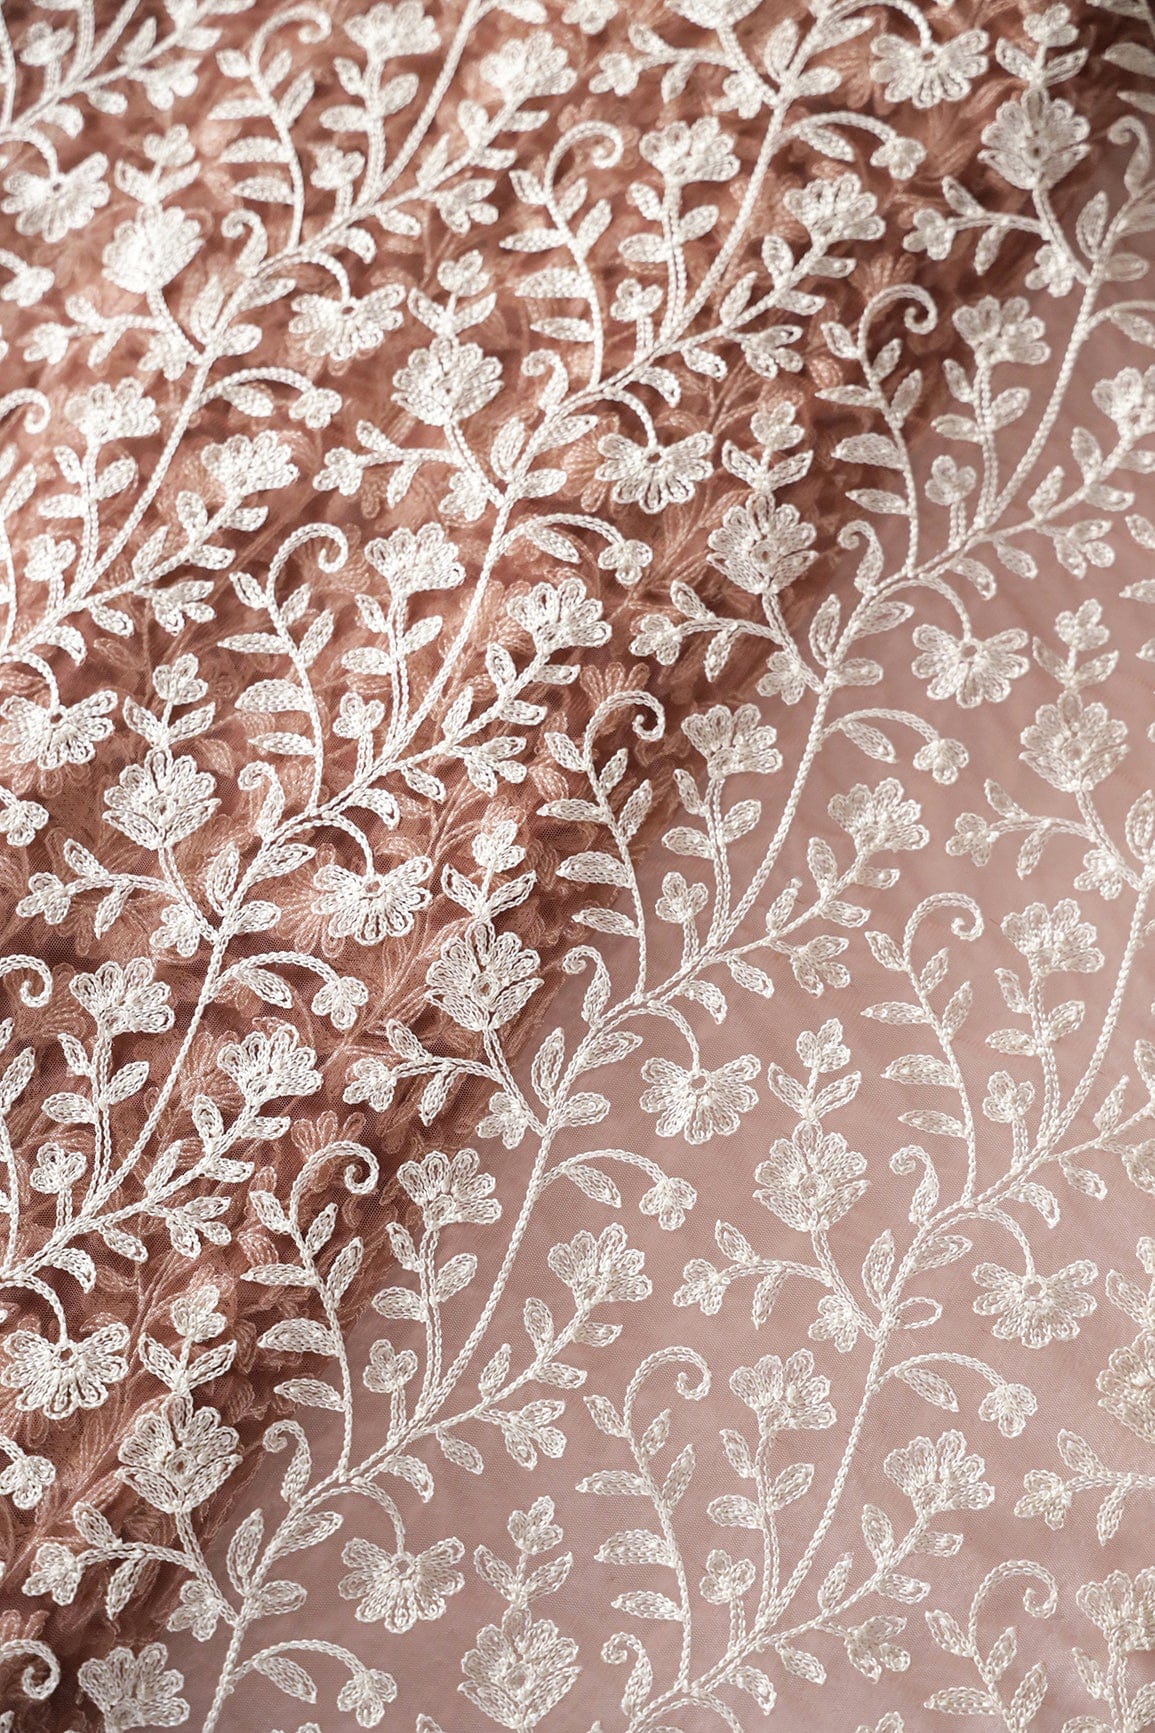 doeraa Embroidery Fabrics Beautiful White Thread Floral Embroidery On Brown Soft Net Fabric